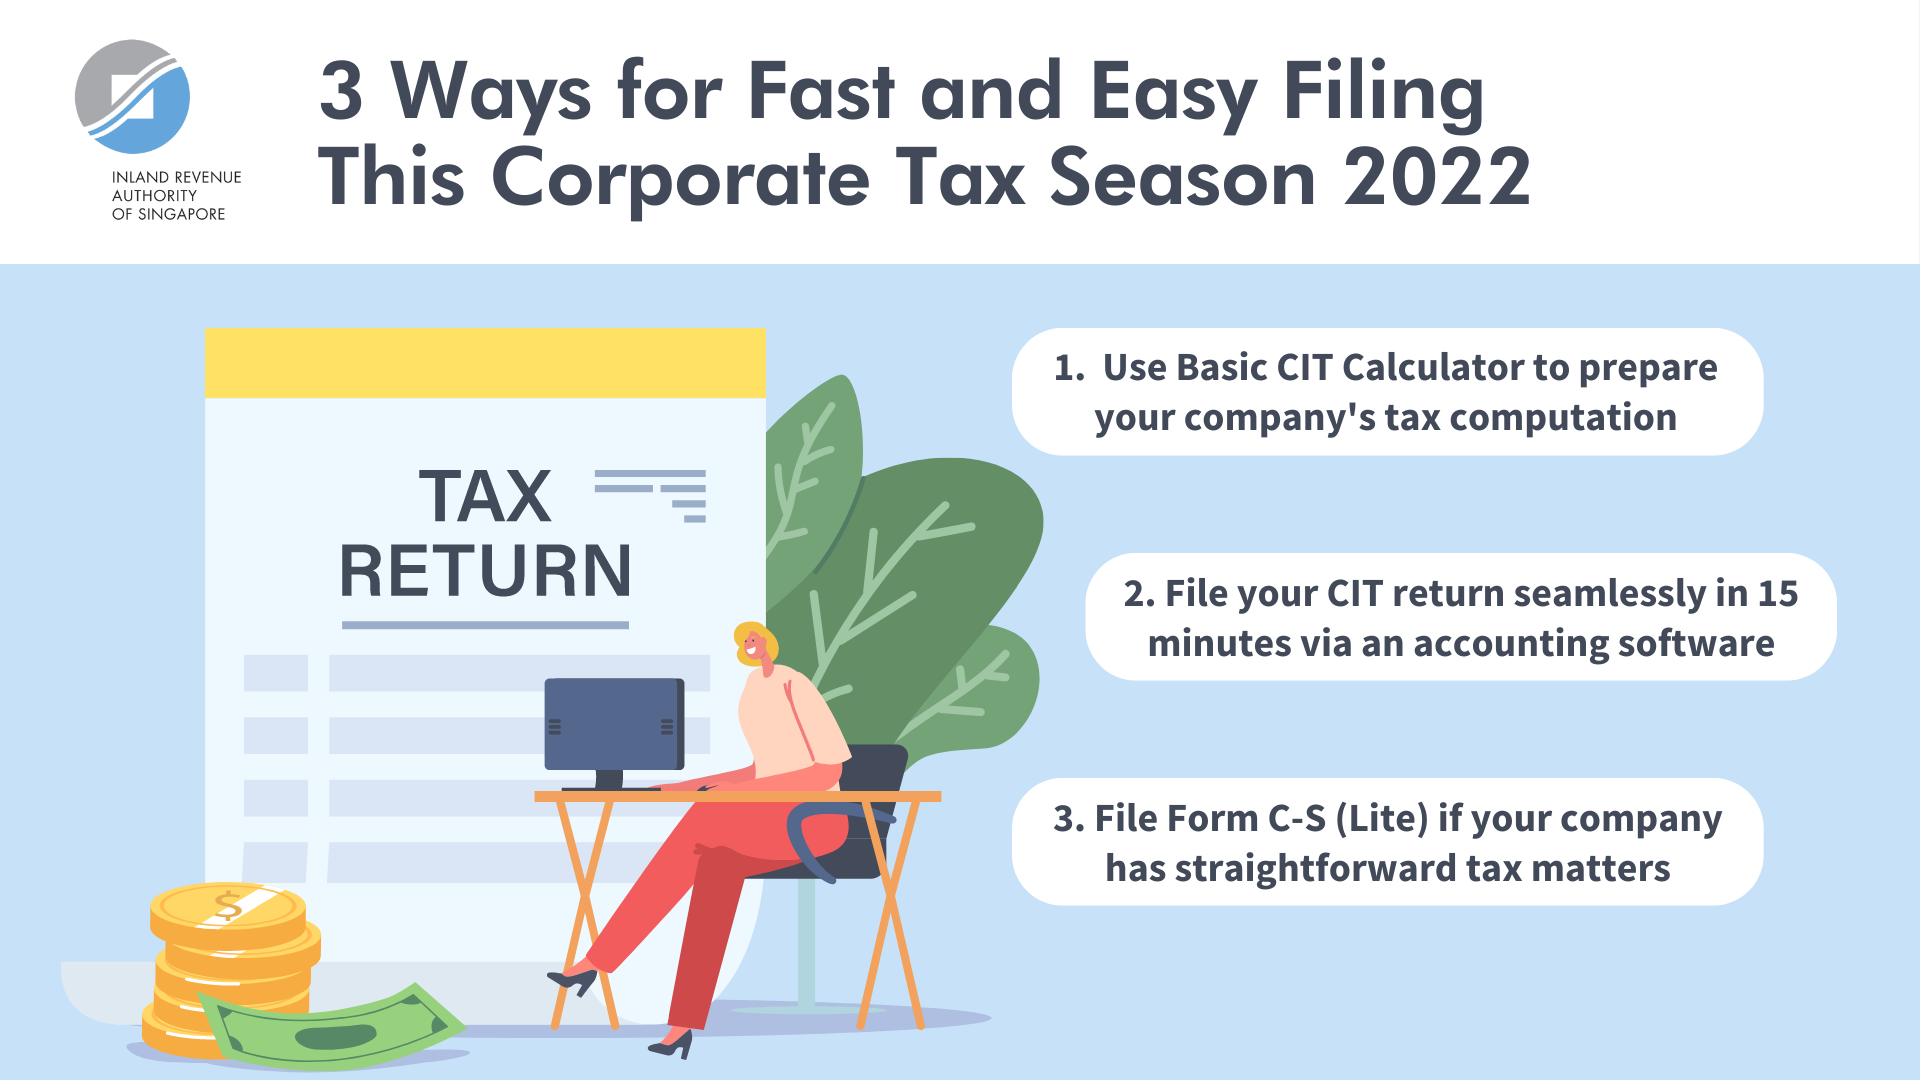 3-ways-for-fast-and-easy-filing-this-corporate-tax-season-2022-sme